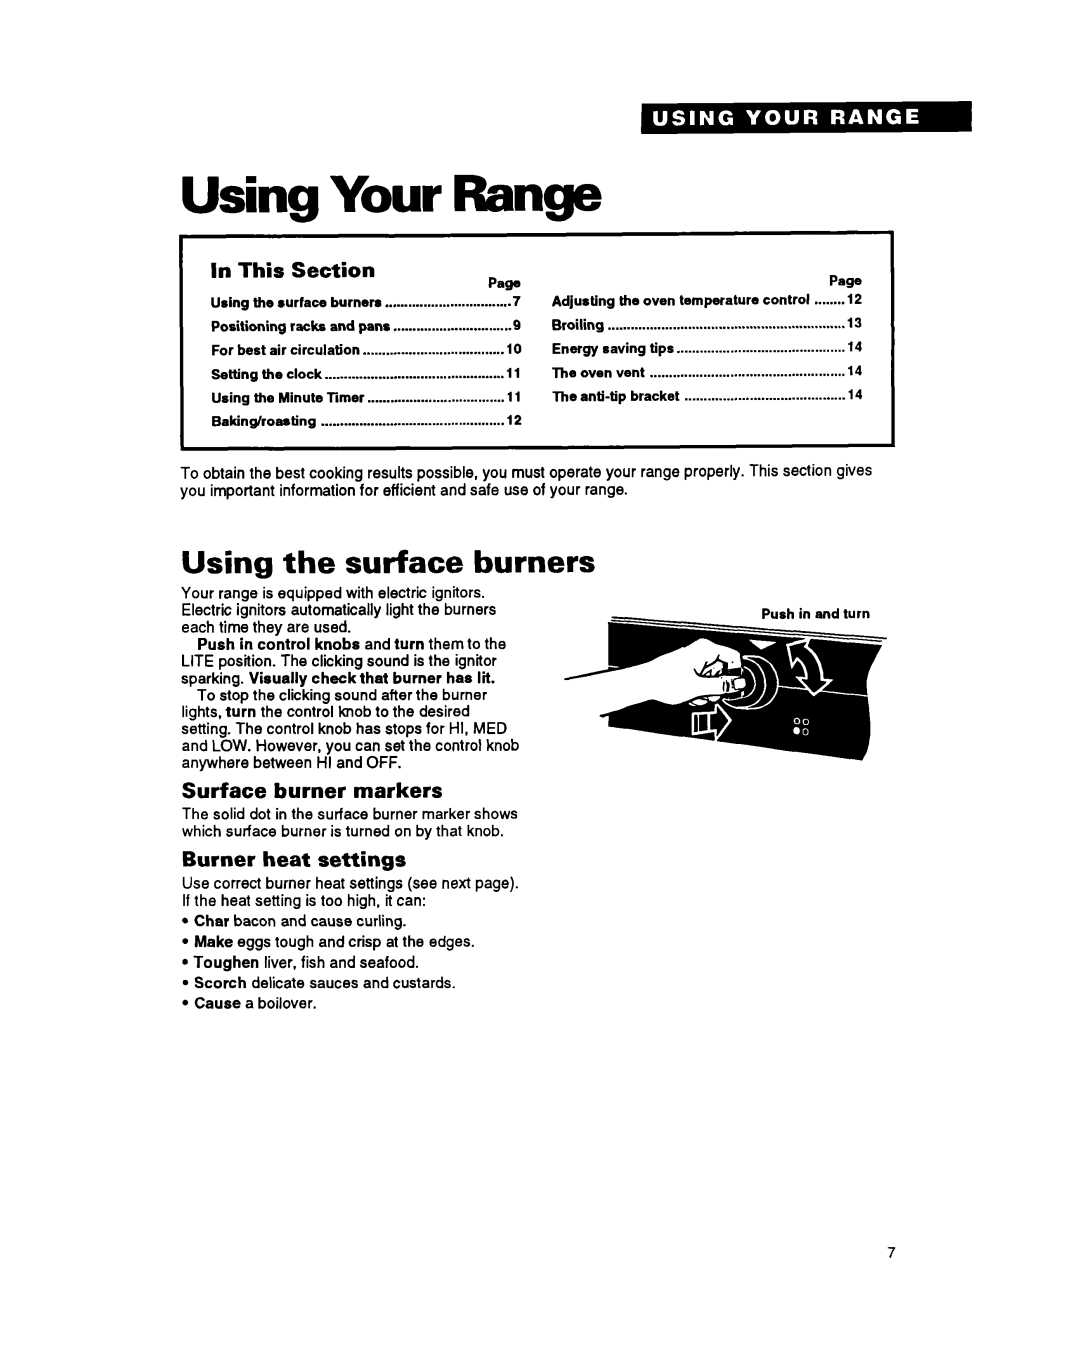 Whirlpool FGP357Y Your, Range, Using the surface burners, This, Section, Surface burner markers, Burner heat settings 